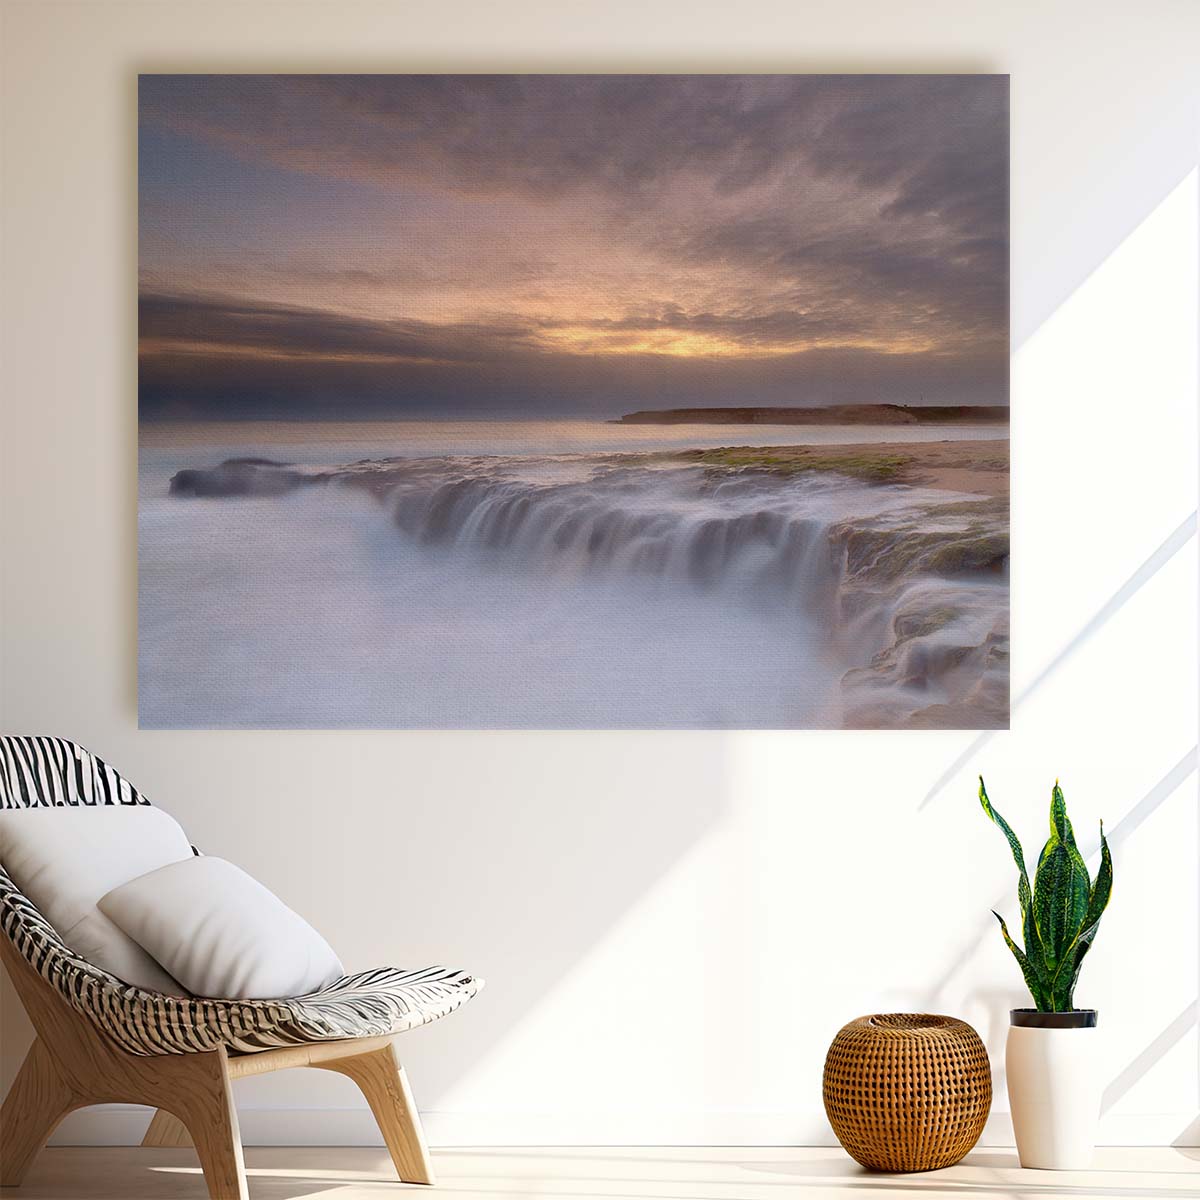 Serene Waterfall & Sunset Seascape Long Exposure Wall Art by Luxuriance Designs. Made in USA.